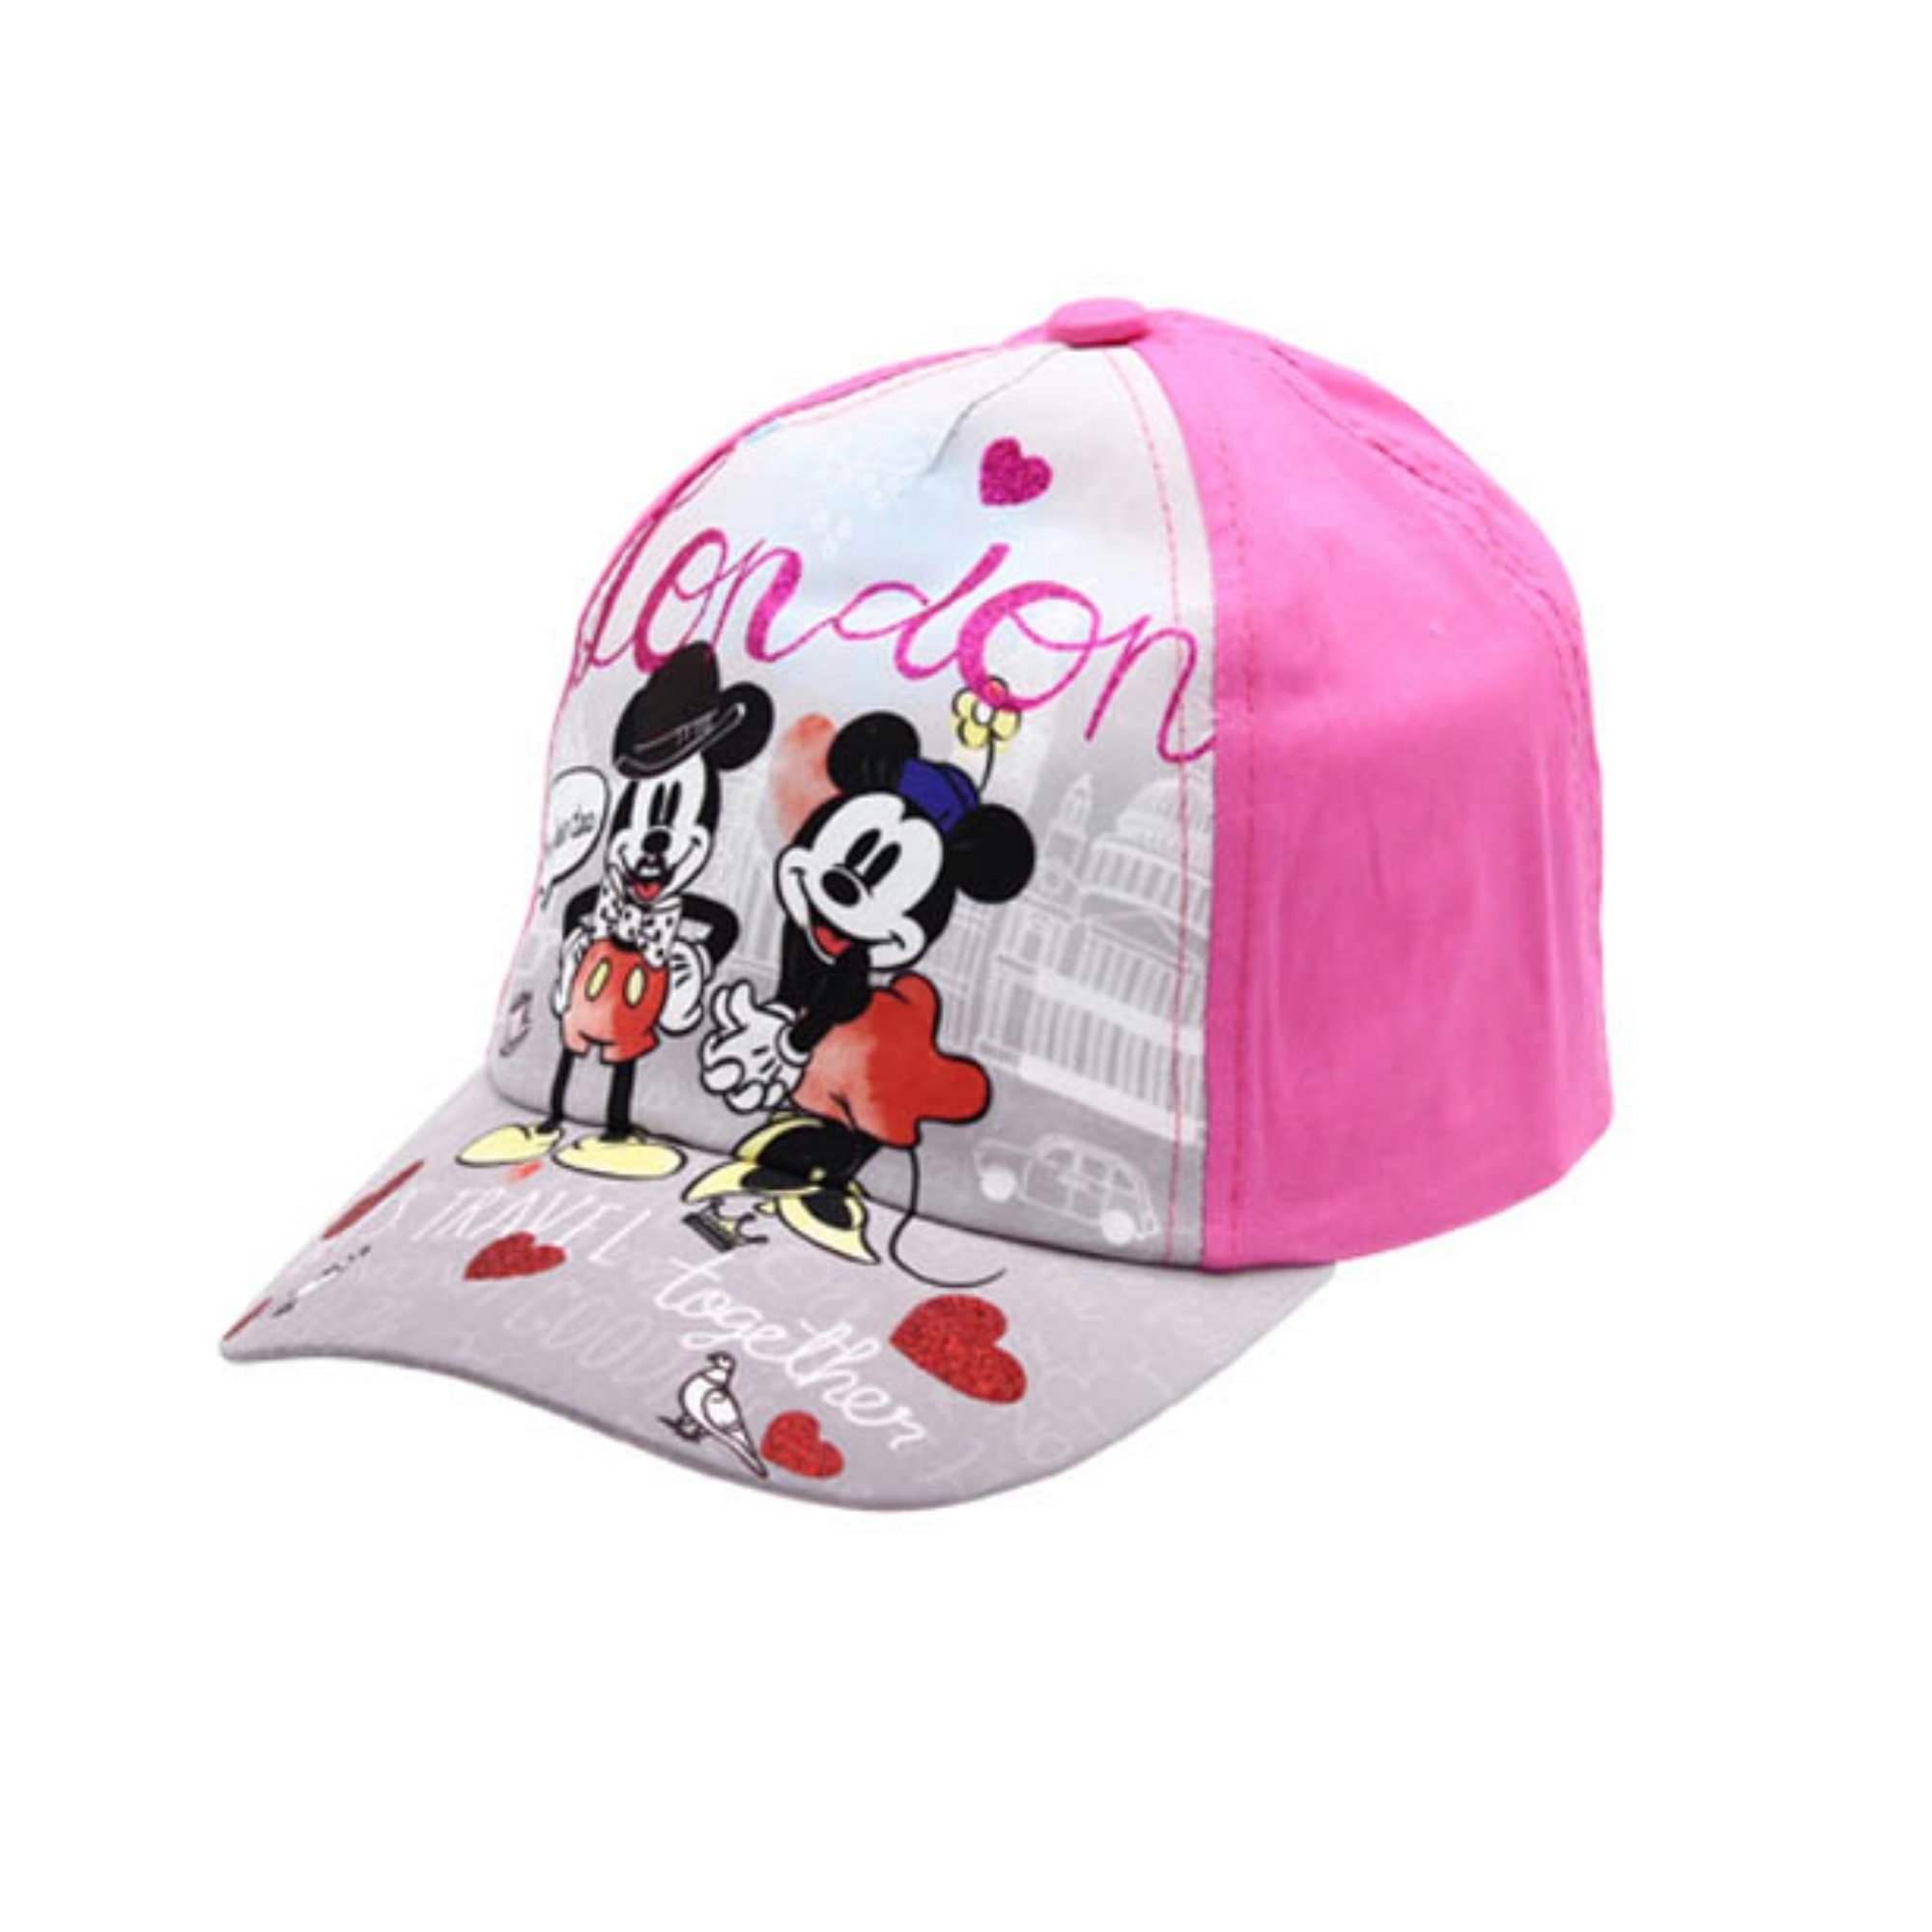 Kinder Kids (Gr. 92 -146) Disney Minnie Mouse Baseball Cap Mickey and Minnie in London Gr. 52 oder 54